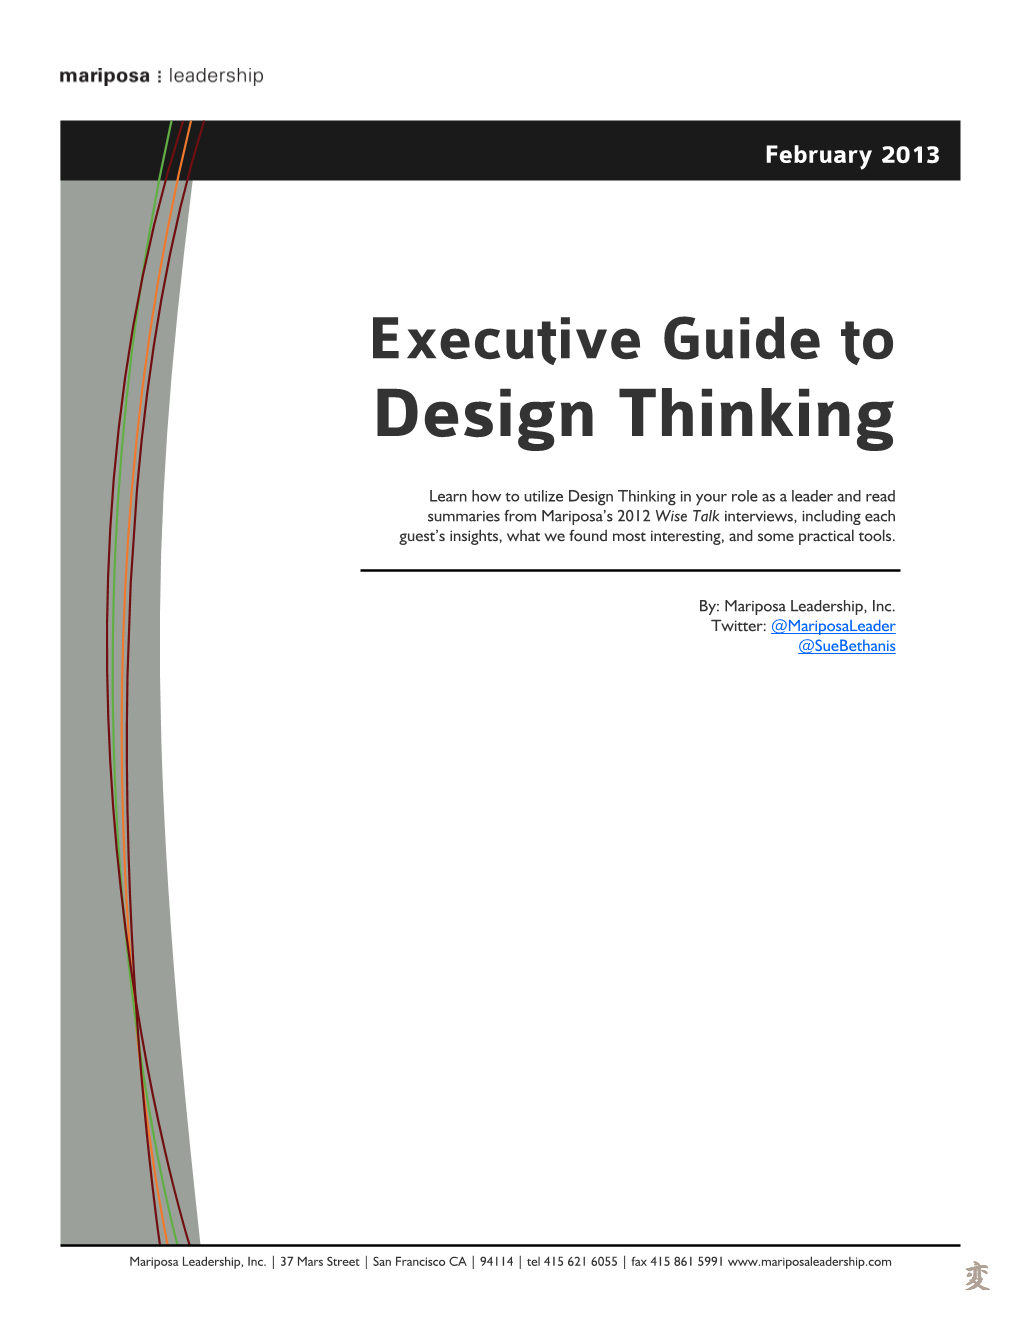 Executive Guide to Design Thinking 2-28-13